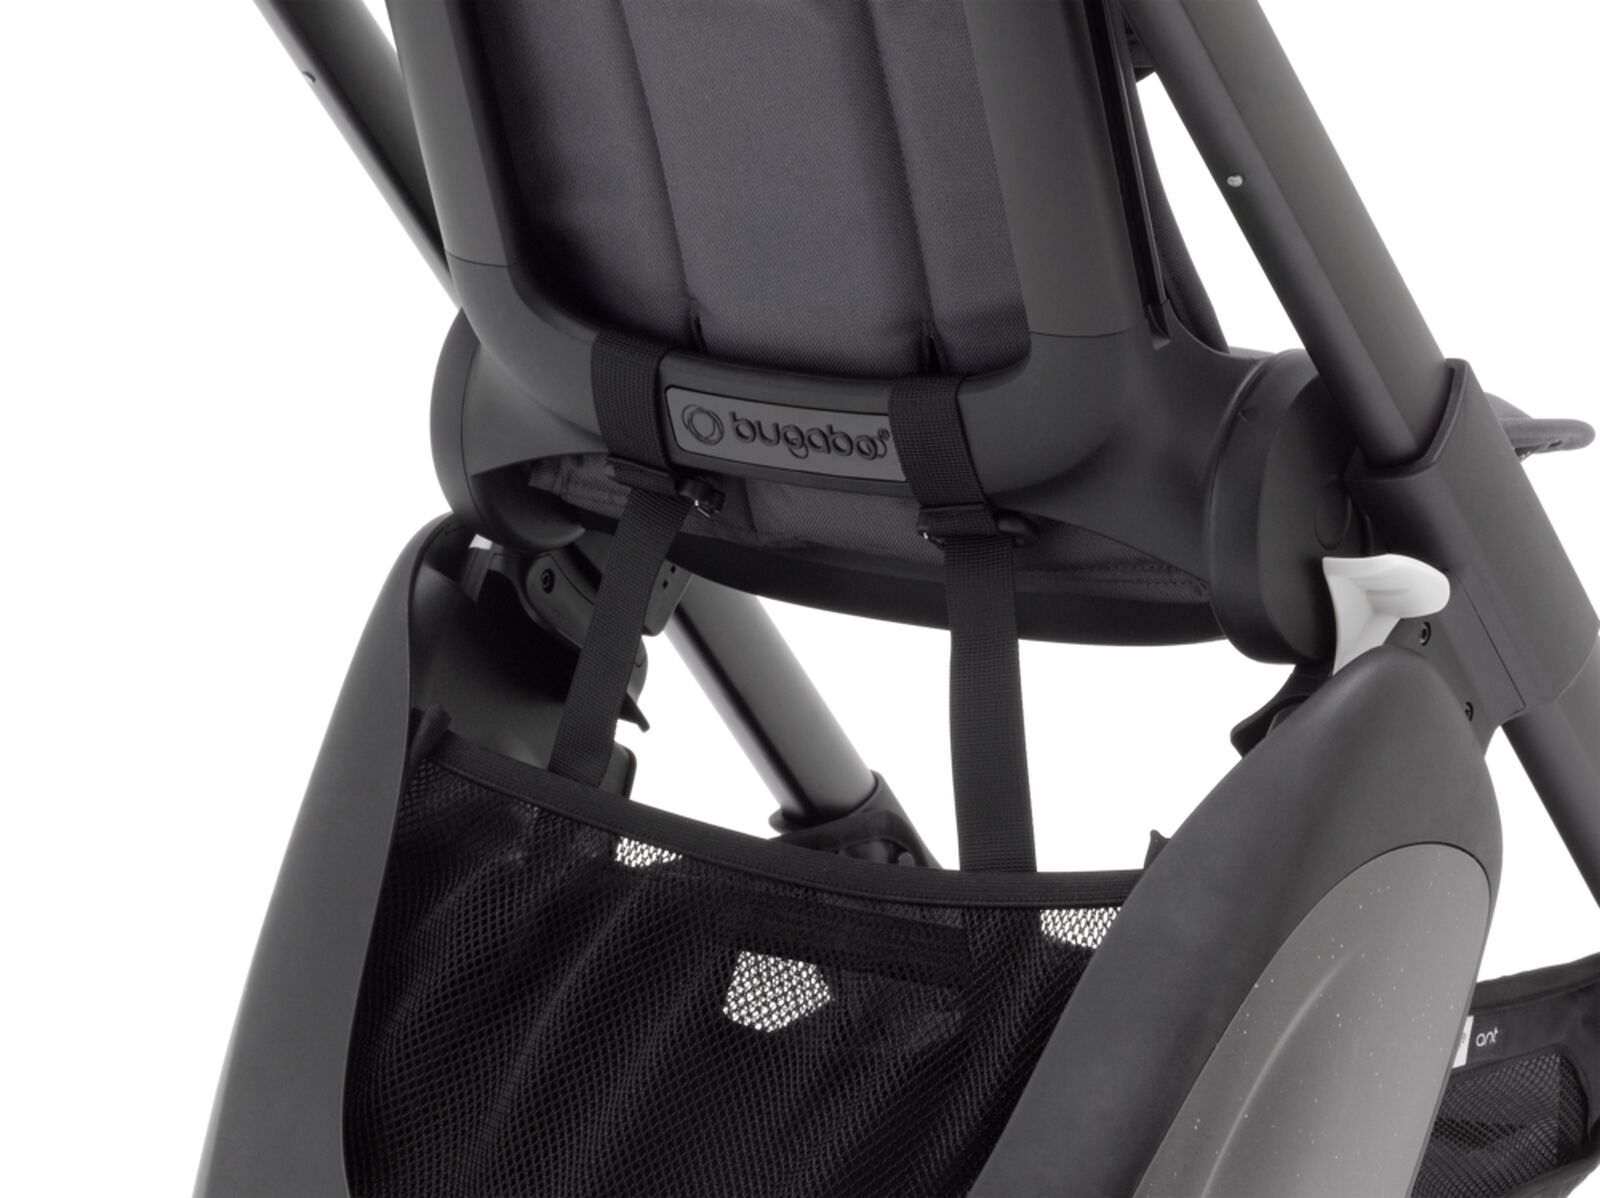 Bugaboo Ant carry strap - View 4